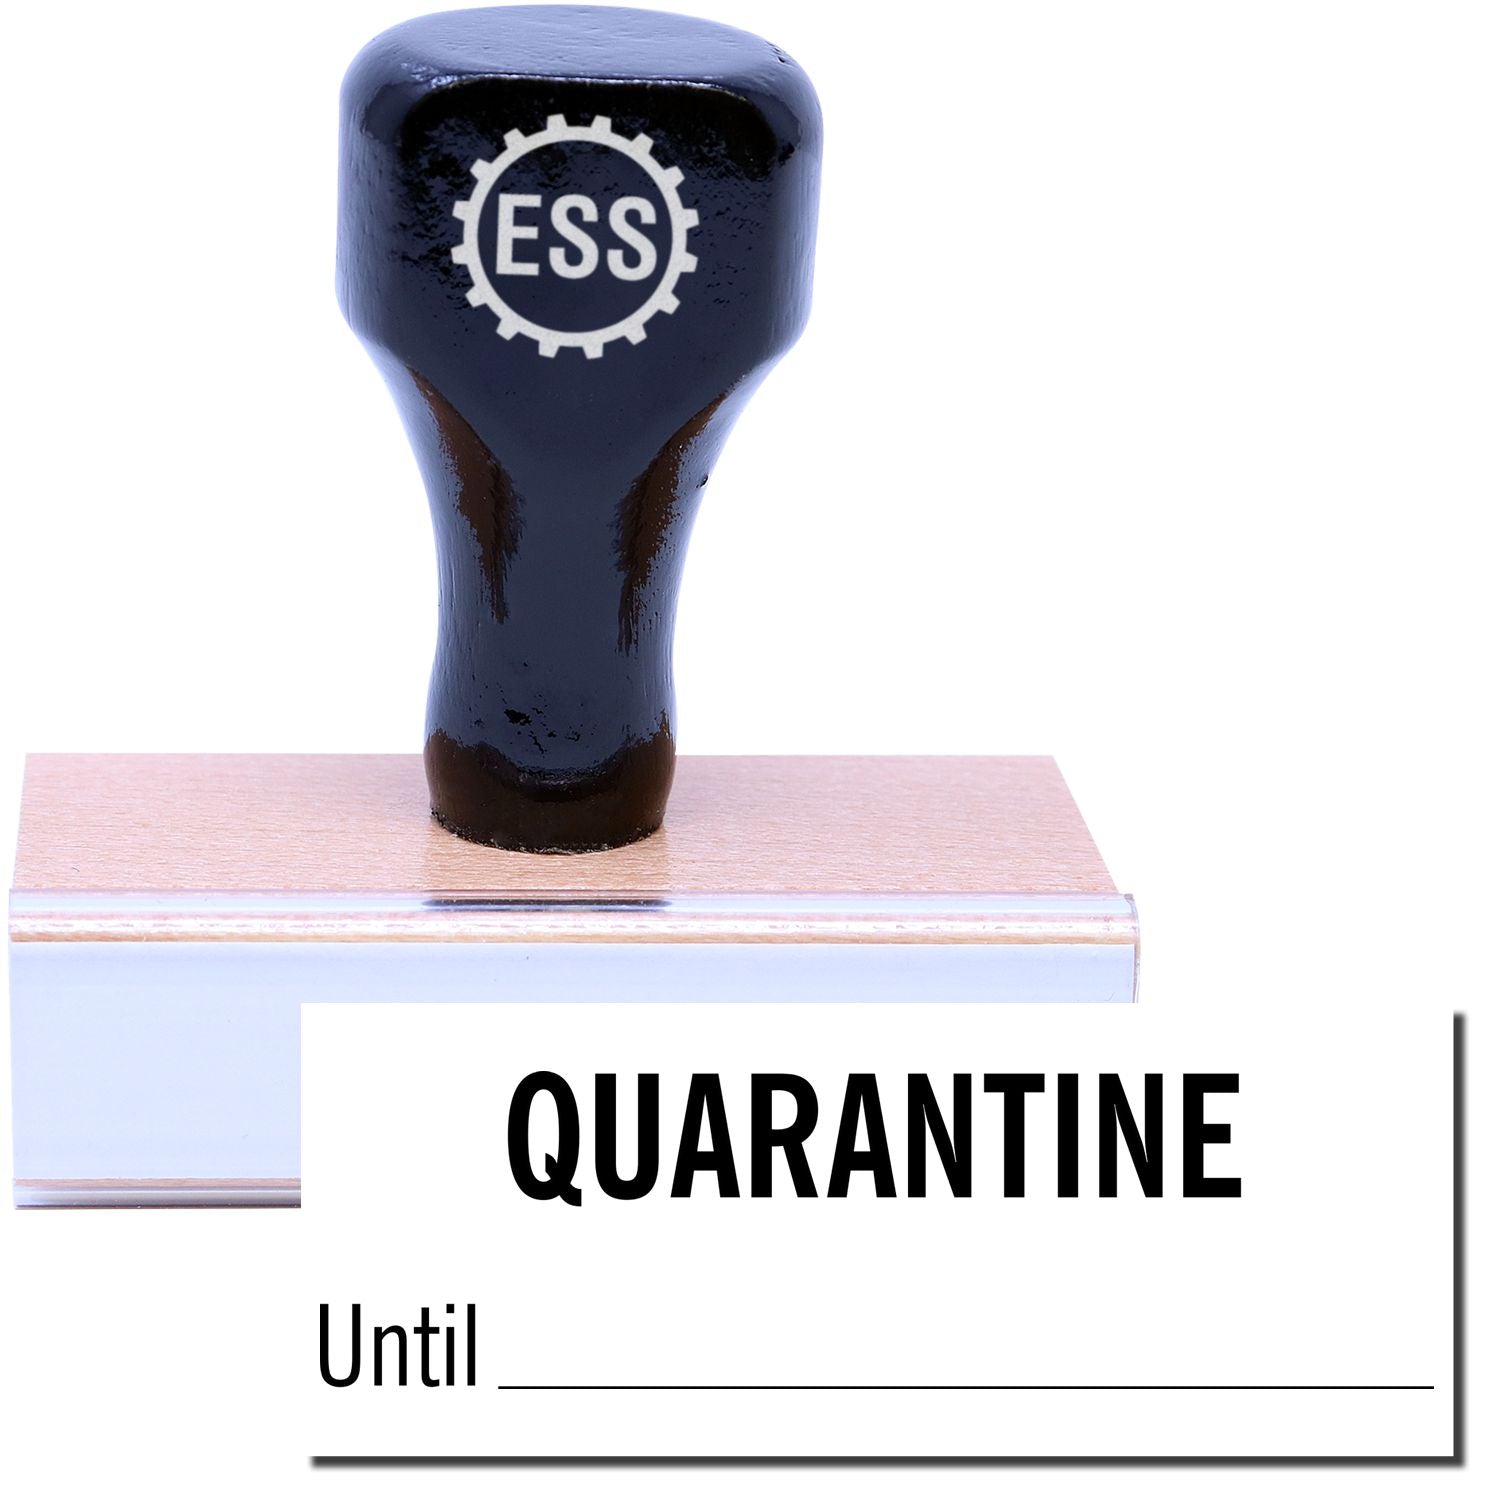 A stock office rubber stamp with a stamped image showing how the text "QUARANTINE Until" in a large font with a line is displayed after stamping.